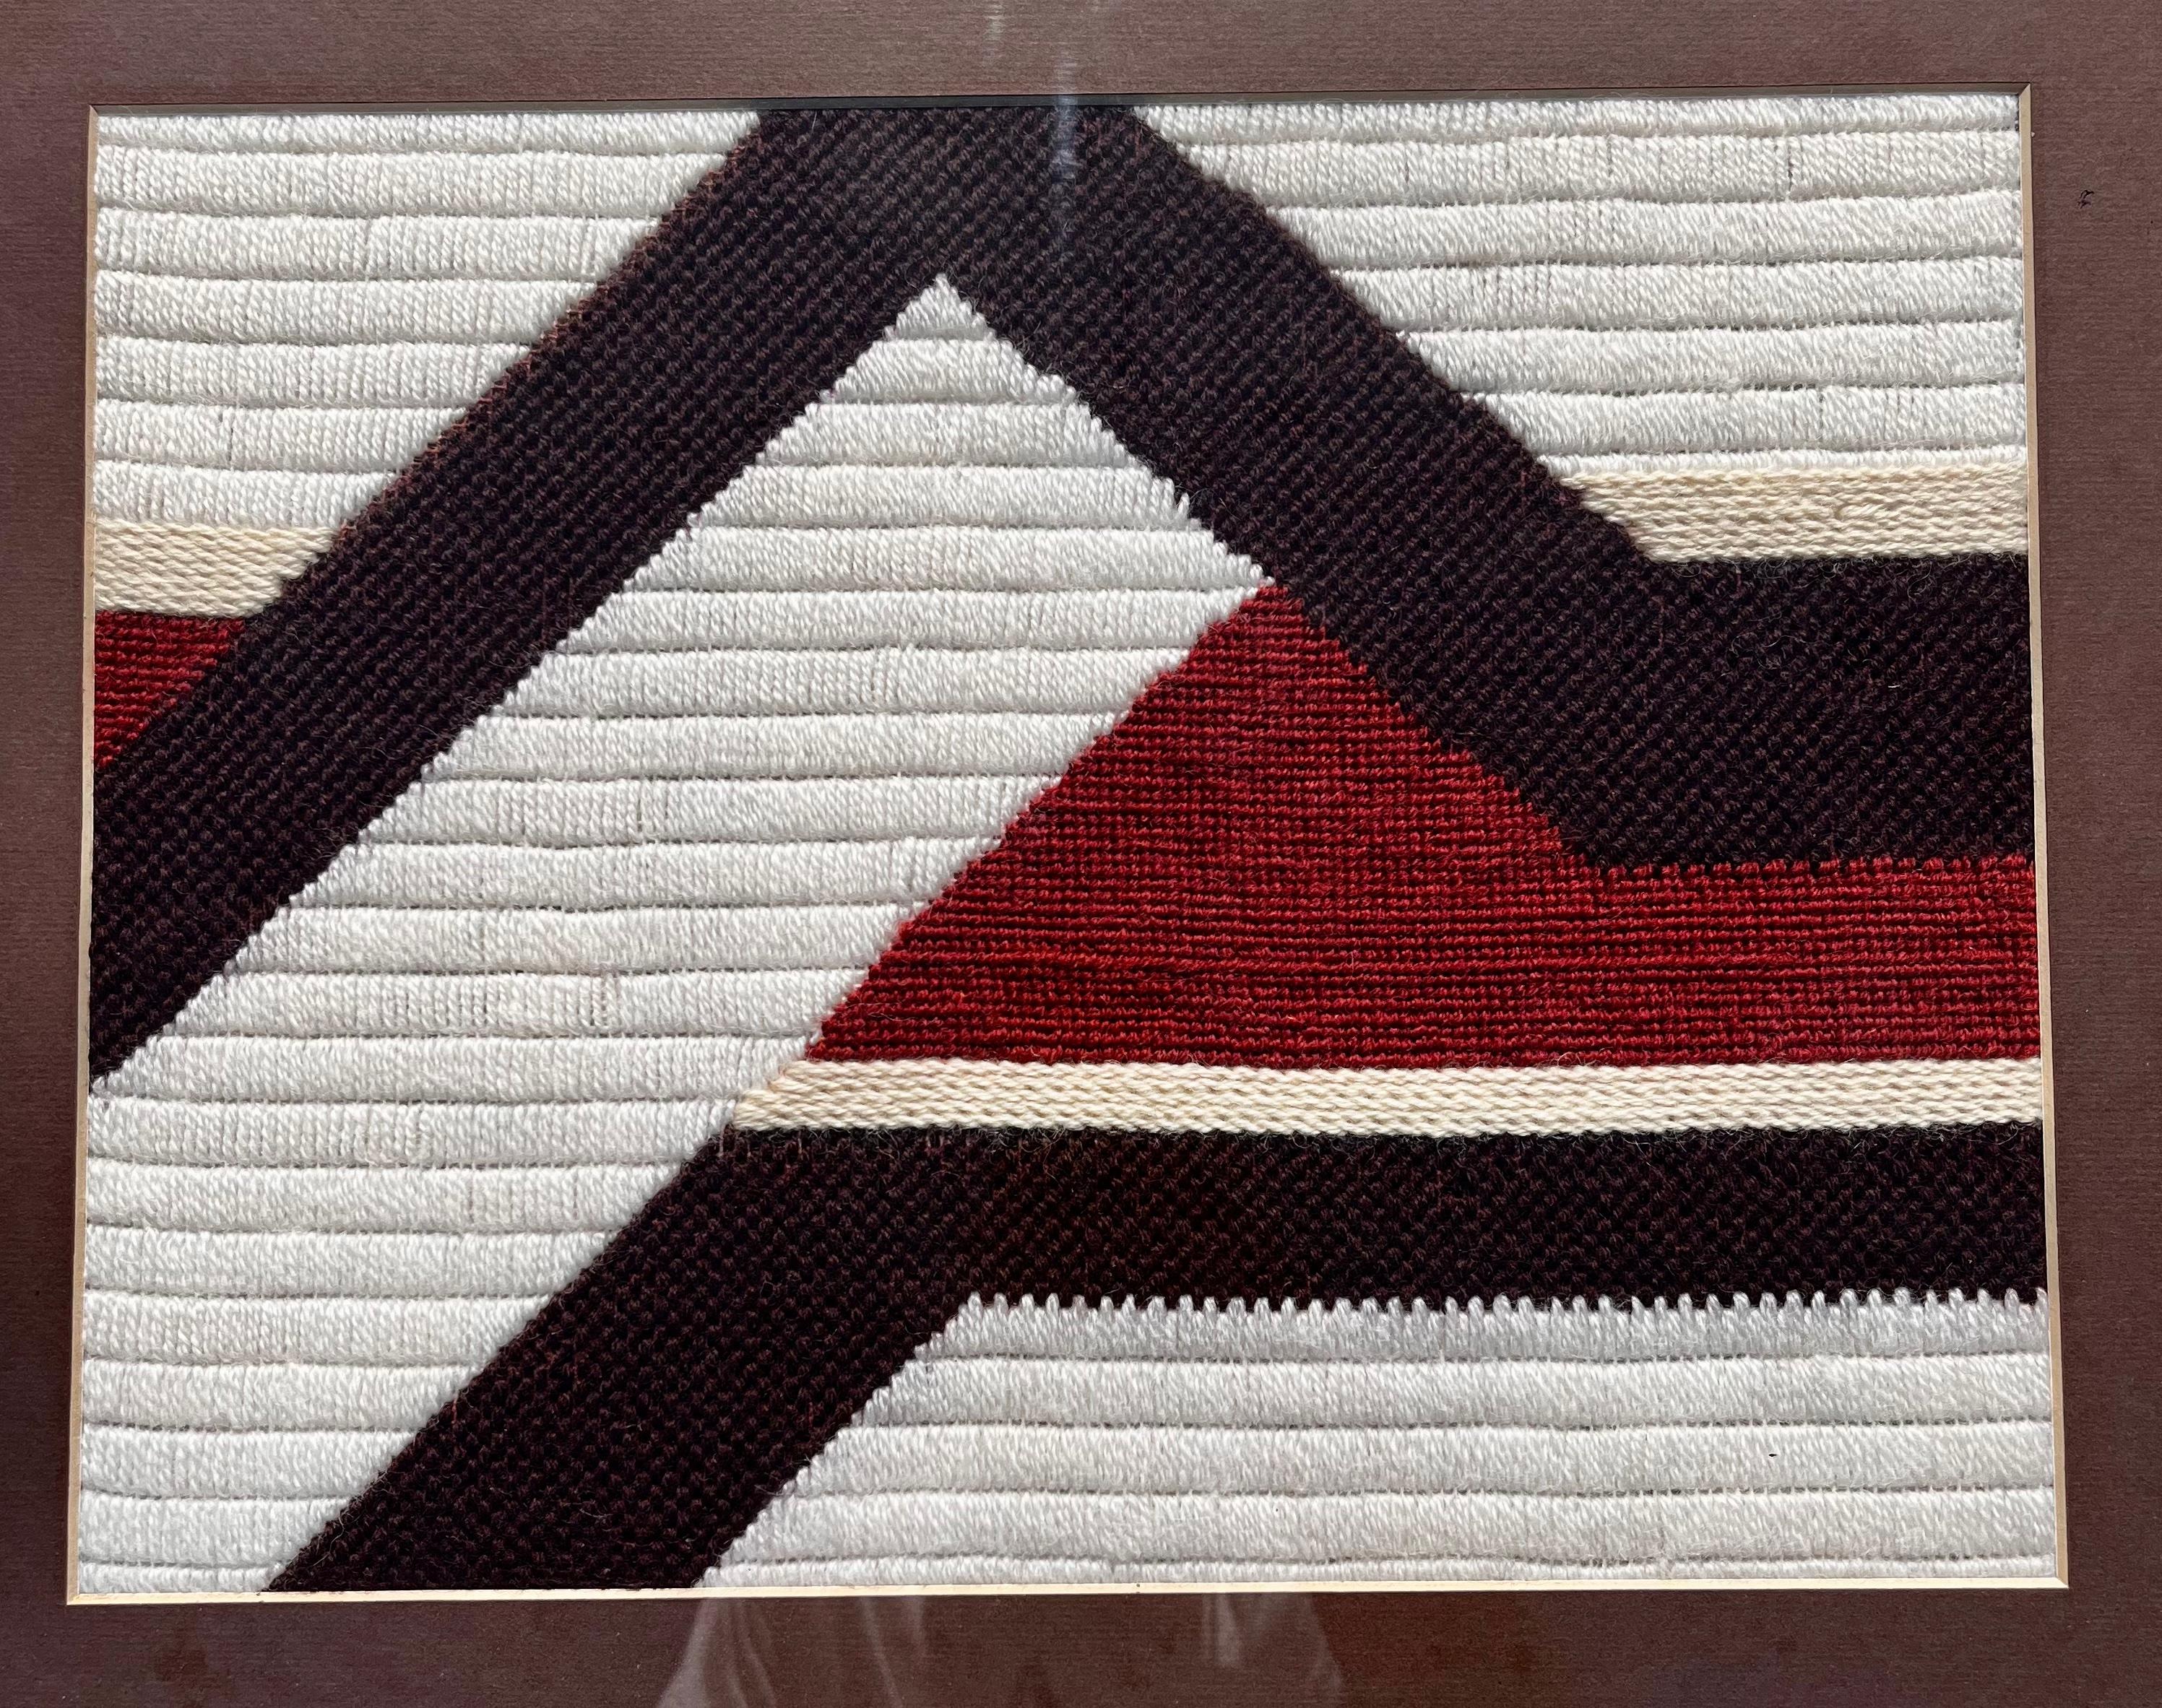 Vintage Mid-Century Modern Woven Textile Framed Abstract Wall Art, circa 1970s  For Sale 1